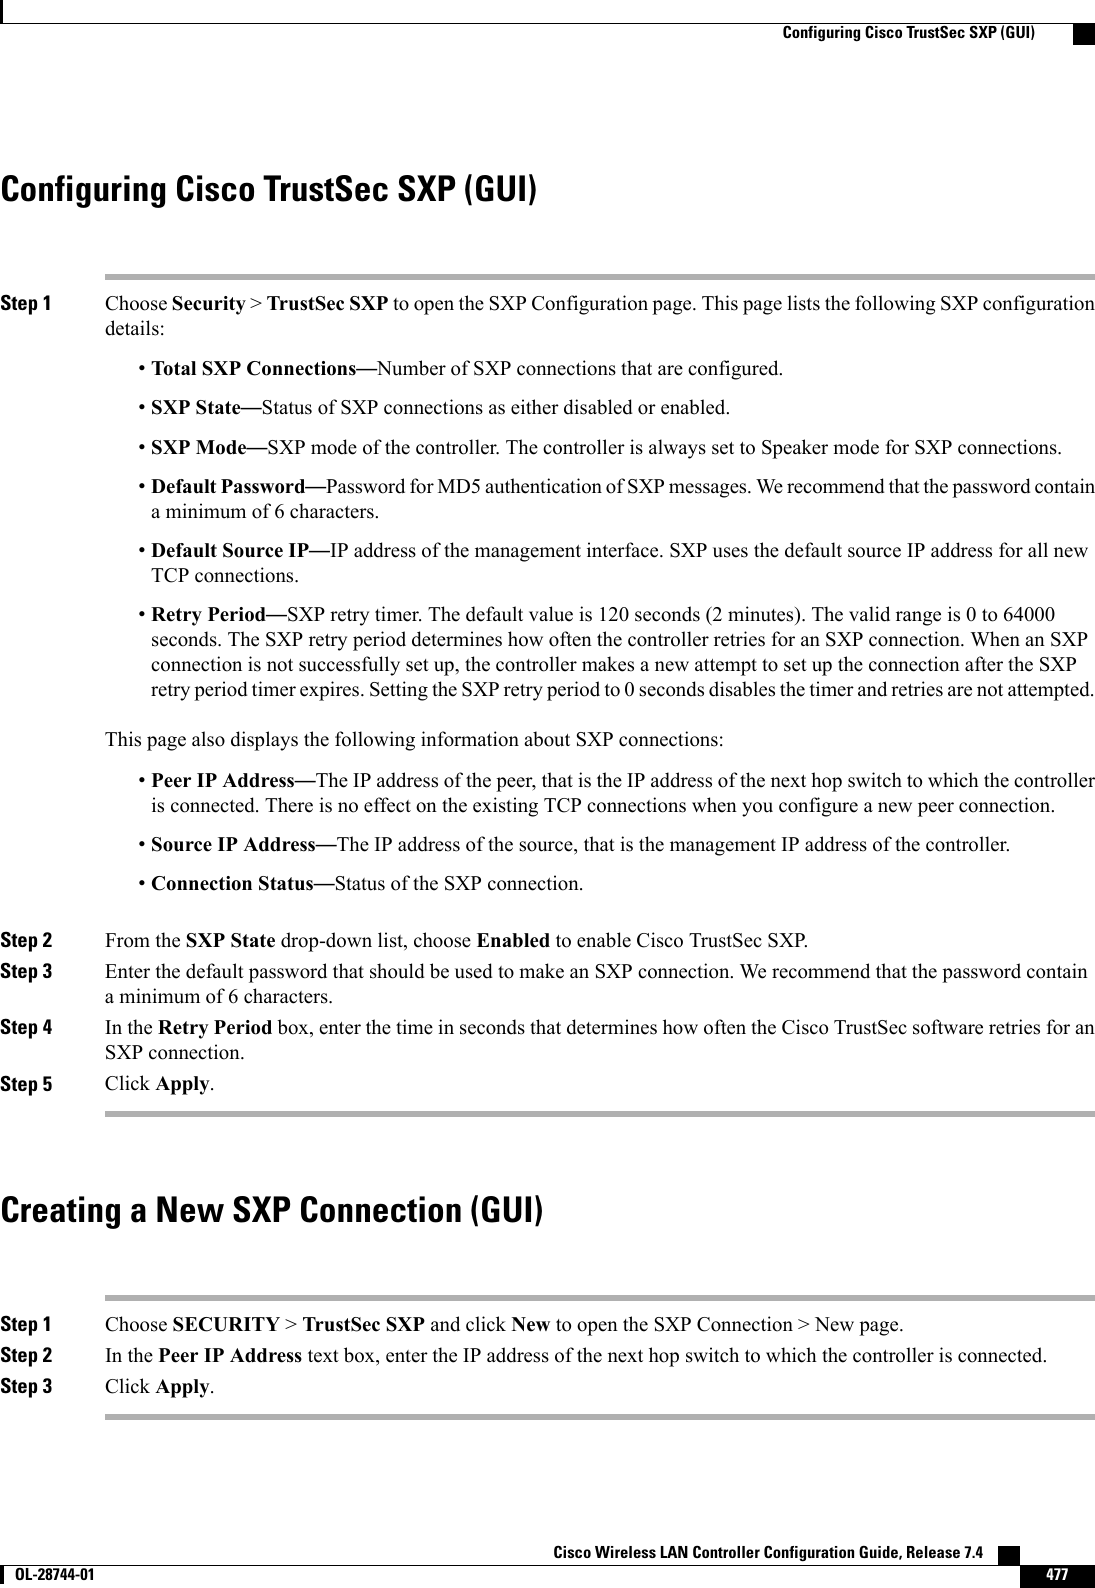 Configuring Cisco TrustSec SXP (GUI)Step 1 Choose Security &gt;TrustSec SXP to open the SXP Configuration page. This page lists the following SXP configurationdetails:•Total SXP Connections—Number of SXP connections that are configured.•SXP State—Status of SXP connections as either disabled or enabled.•SXP Mode—SXP mode of the controller. The controller is always set to Speaker mode for SXP connections.•Default Password—Password for MD5 authentication of SXP messages. We recommend that the password containa minimum of 6 characters.•Default Source IP—IP address of the management interface. SXP uses the default source IP address for all newTCP connections.•Retry Period—SXP retry timer. The default value is 120 seconds (2 minutes). The valid range is 0 to 64000seconds. The SXP retry period determines how often the controller retries for an SXP connection. When an SXPconnection is not successfully set up, the controller makes a new attempt to set up the connection after the SXPretry period timer expires. Setting the SXP retry period to 0 seconds disables the timer and retries are not attempted.This page also displays the following information about SXP connections:•Peer IP Address—The IP address of the peer, that is the IP address of the next hop switch to which the controlleris connected. There is no effect on the existing TCP connections when you configure a new peer connection.•Source IP Address—The IP address of the source, that is the management IP address of the controller.•Connection Status—Status of the SXP connection.Step 2 From the SXP State drop-down list, choose Enabled to enable Cisco TrustSec SXP.Step 3 Enter the default password that should be used to make an SXP connection. We recommend that the password containa minimum of 6 characters.Step 4 In the Retry Period box, enter the time in seconds that determines how often the Cisco TrustSec software retries for anSXP connection.Step 5 Click Apply.Creating a New SXP Connection (GUI)Step 1 Choose SECURITY &gt;TrustSec SXP and click New to open the SXP Connection &gt; New page.Step 2 In the Peer IP Address text box, enter the IP address of the next hop switch to which the controller is connected.Step 3 Click Apply.Cisco Wireless LAN Controller Configuration Guide, Release 7.4       OL-28744-01 477Configuring Cisco TrustSec SXP (GUI)